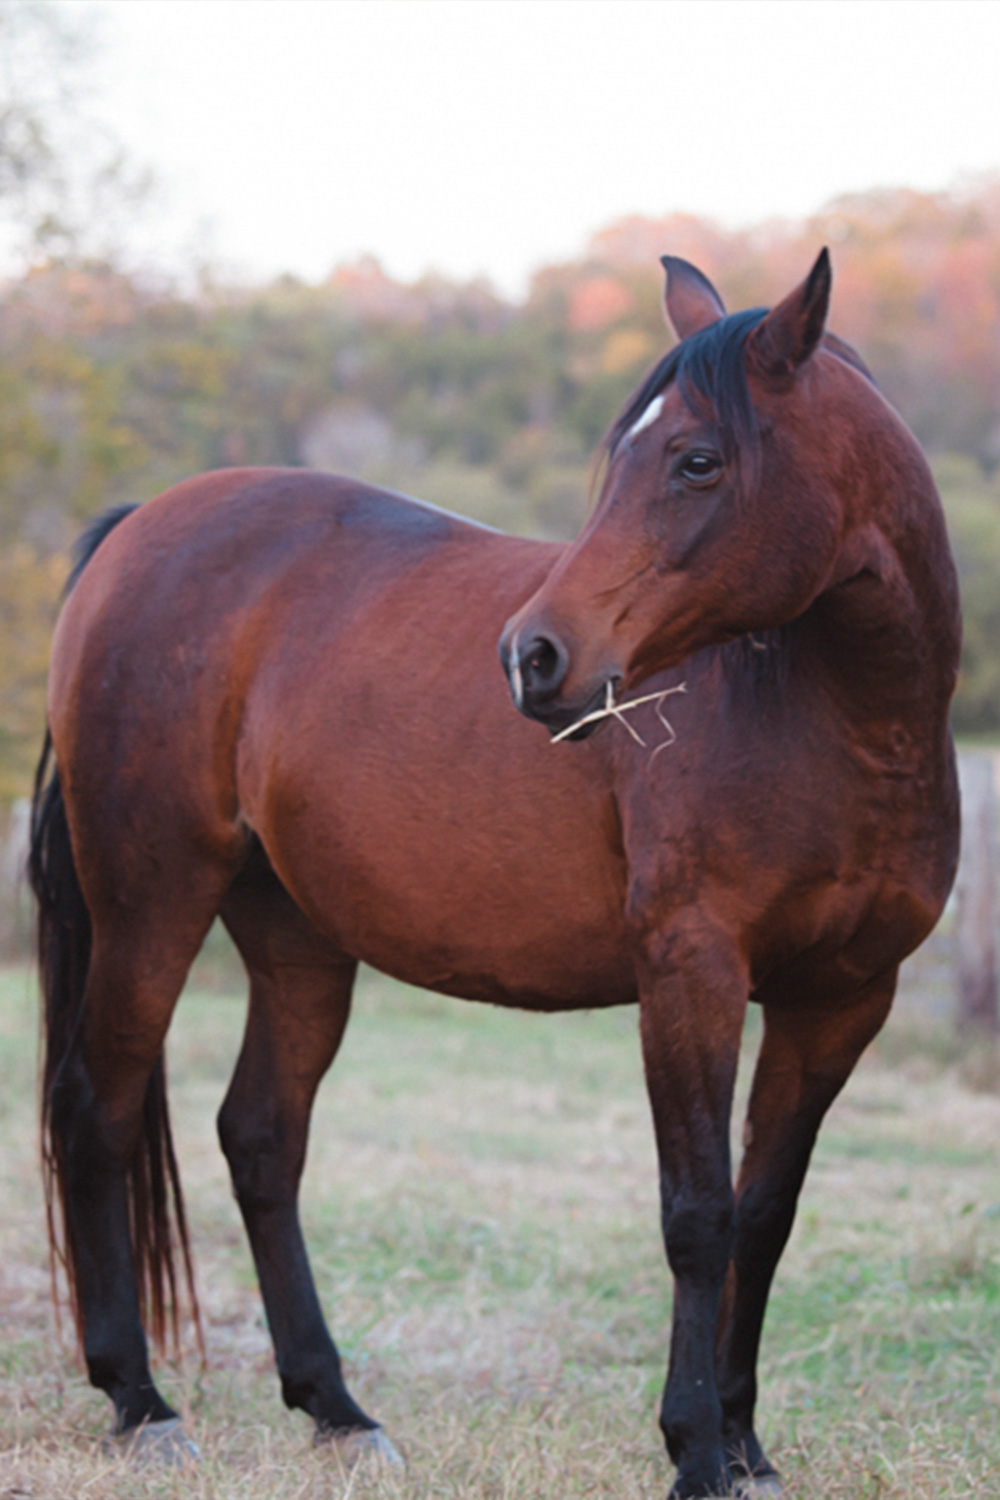 Horse Retirement Farms - Retired Horse in Pasture